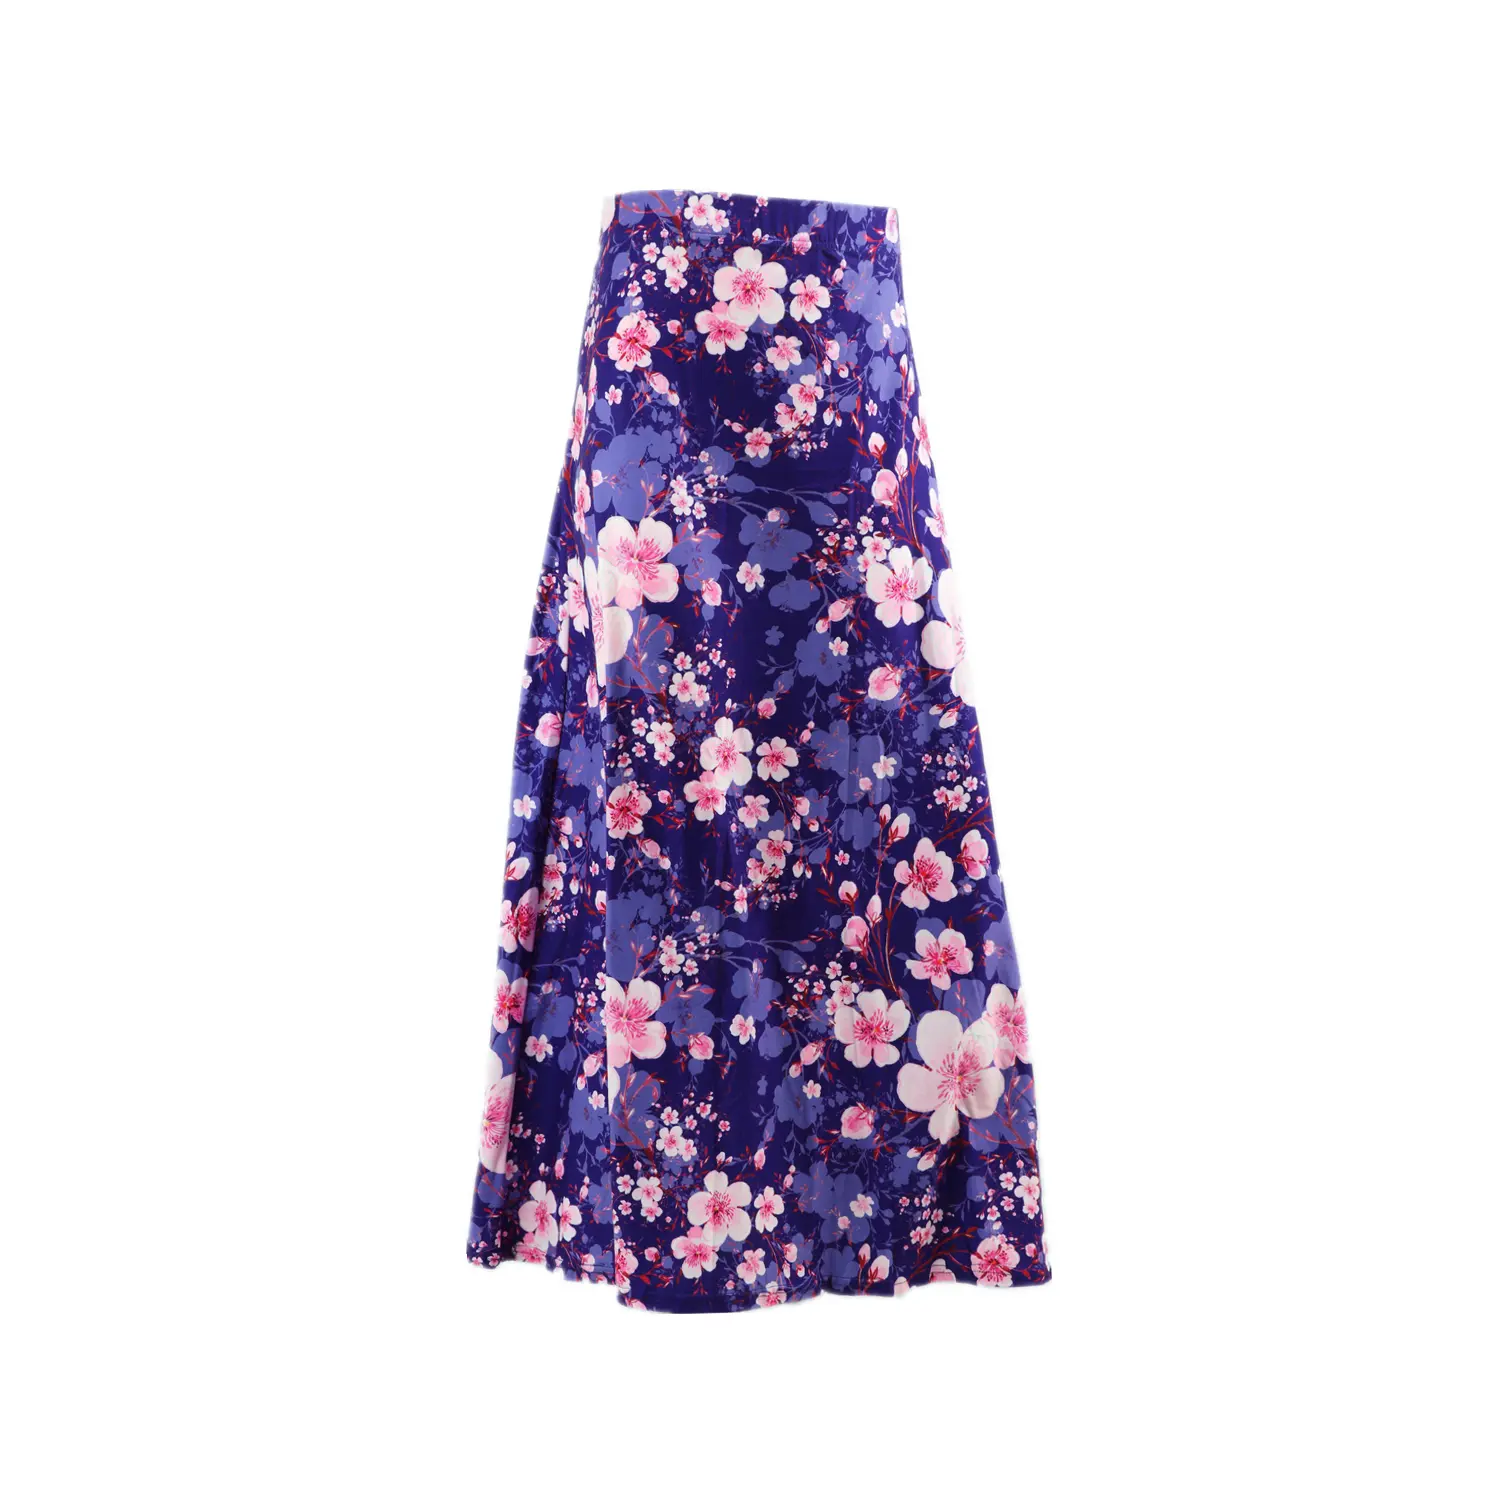 Hot sale customizable ladies daily casual skirt pink purple flower personalized skirt